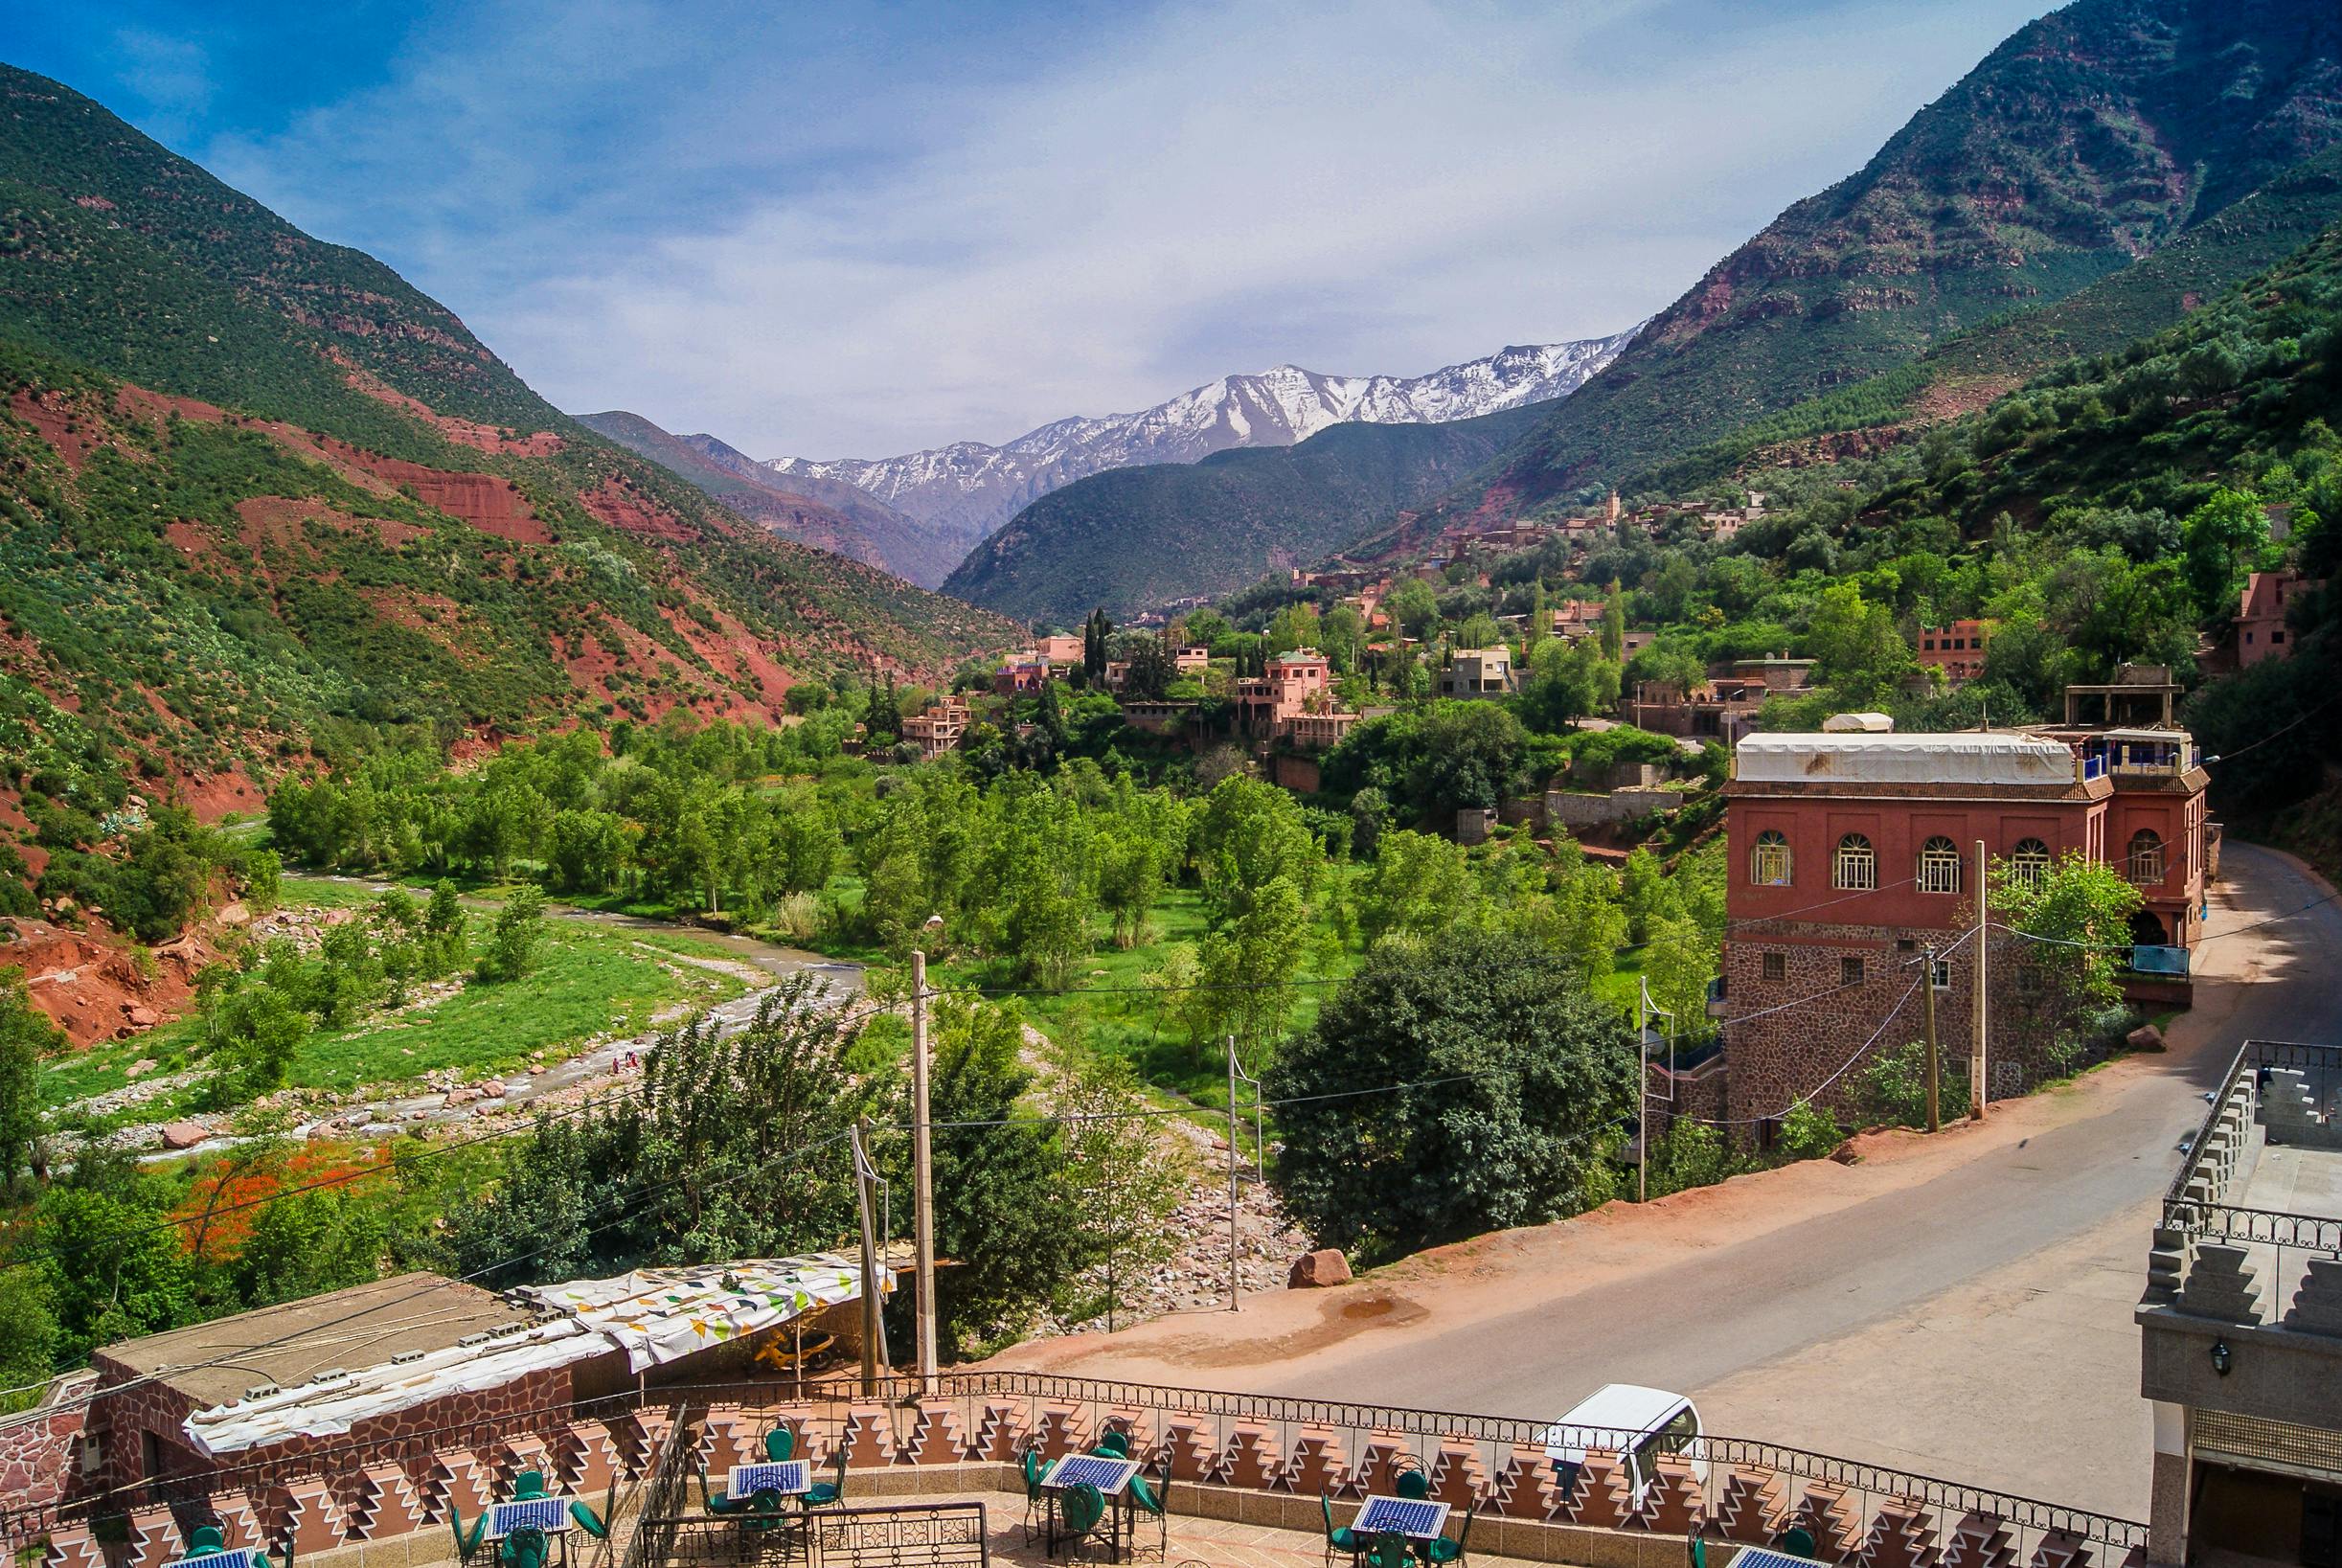 Excursion to the Ourika valley from Marrakech Musement